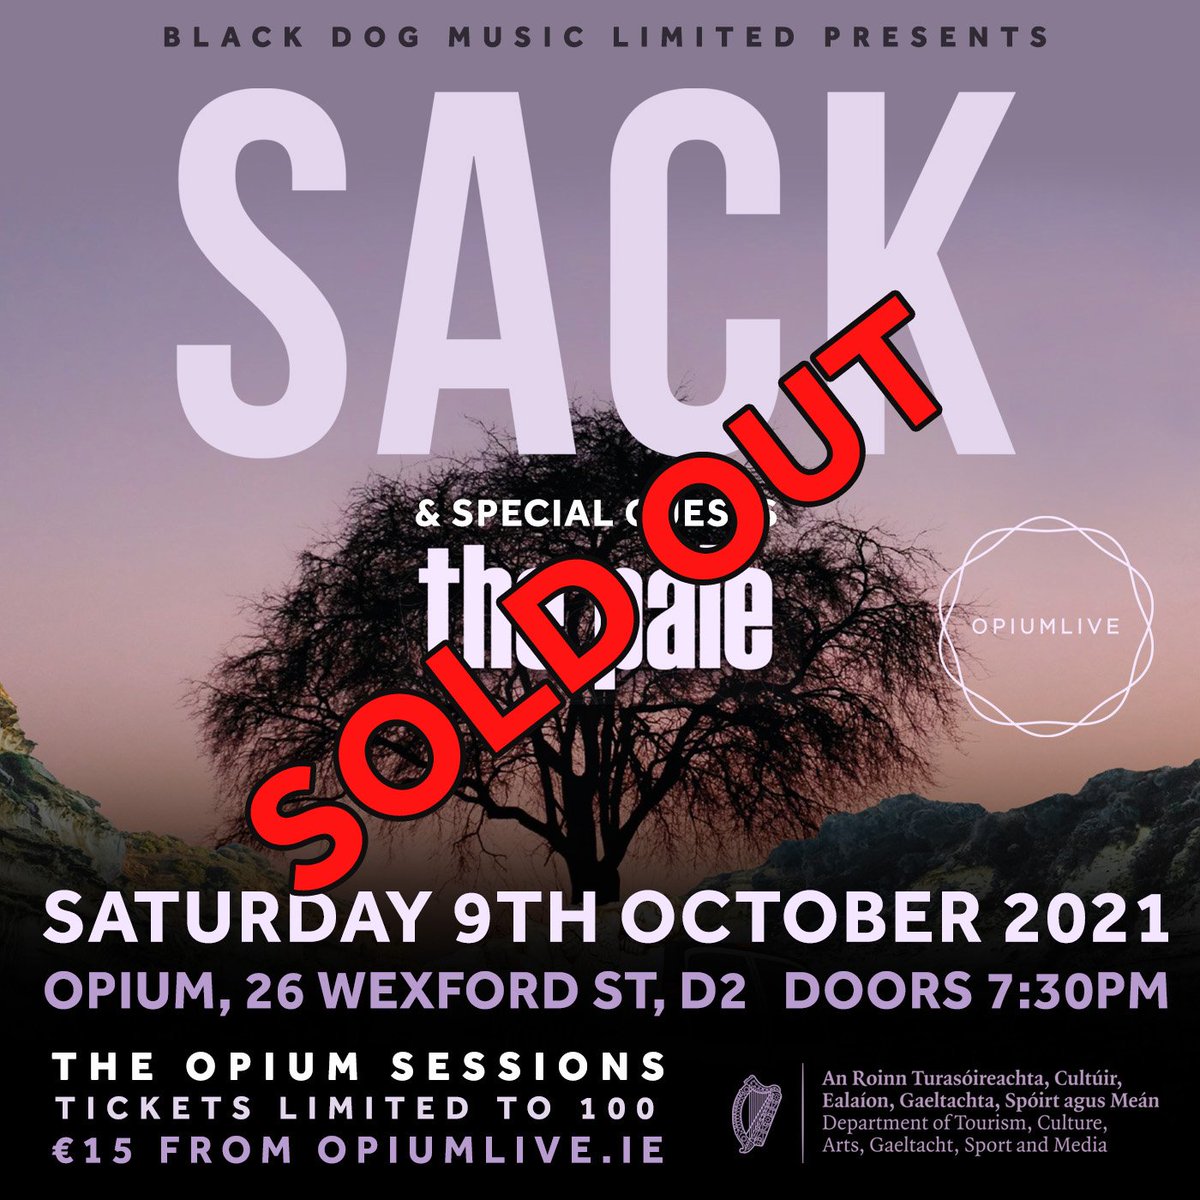 Saturday's show @OpiumLiveDublin with @thepalemusic is now officially Sold out. Thank you to all who bought tickets for the show, we are really looking forward to it. See you all ther
#sack #sacktheband #thepale #thepalemusic #opiumdublin #whelanslive #blackdogmusic  #dimplediscs